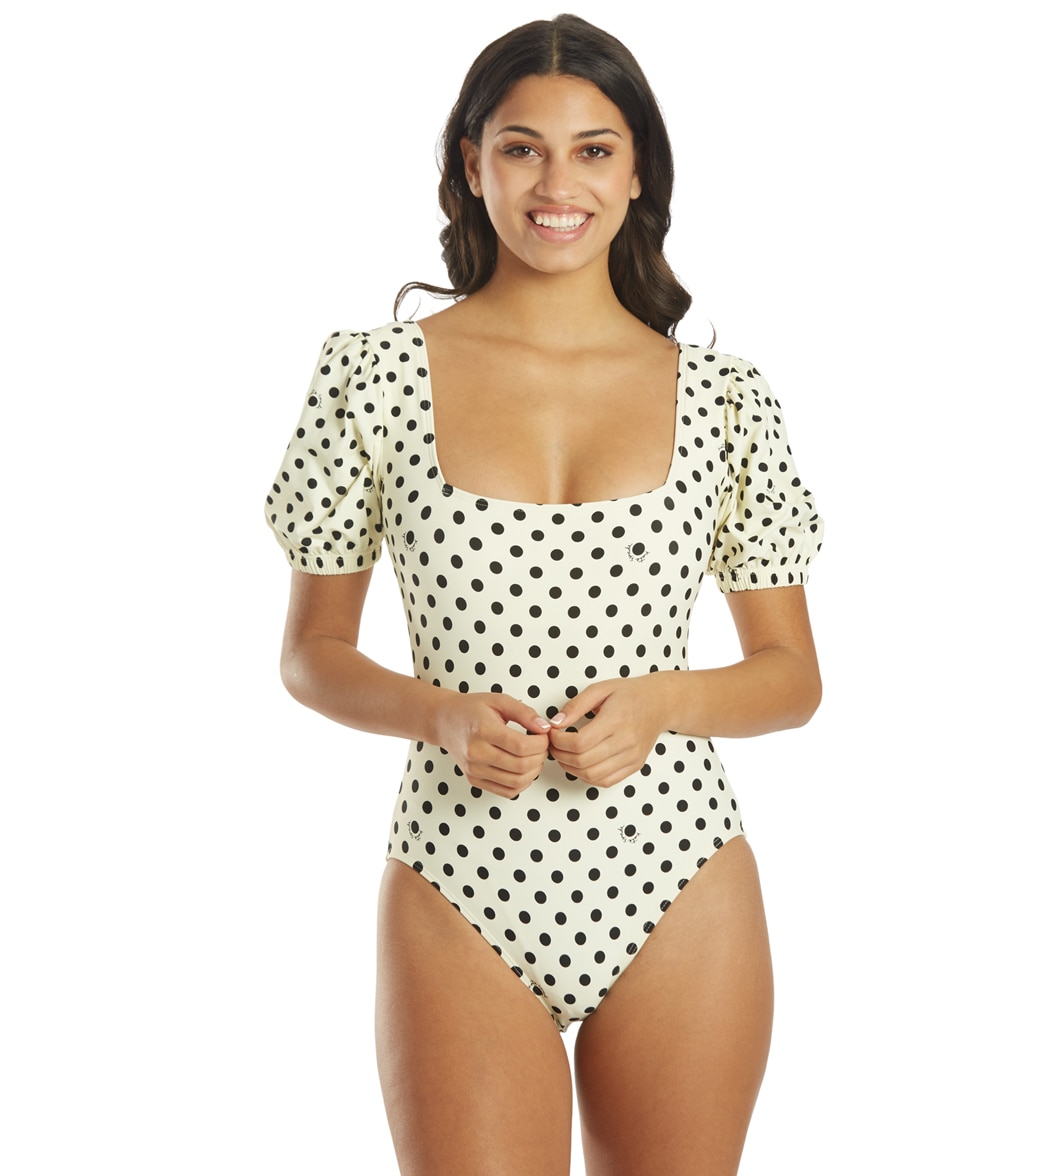 Kate Spade New York Women's Logo Dot Puff Sleeve One Piece Swimsuit - Ivory Large - Swimoutlet.com